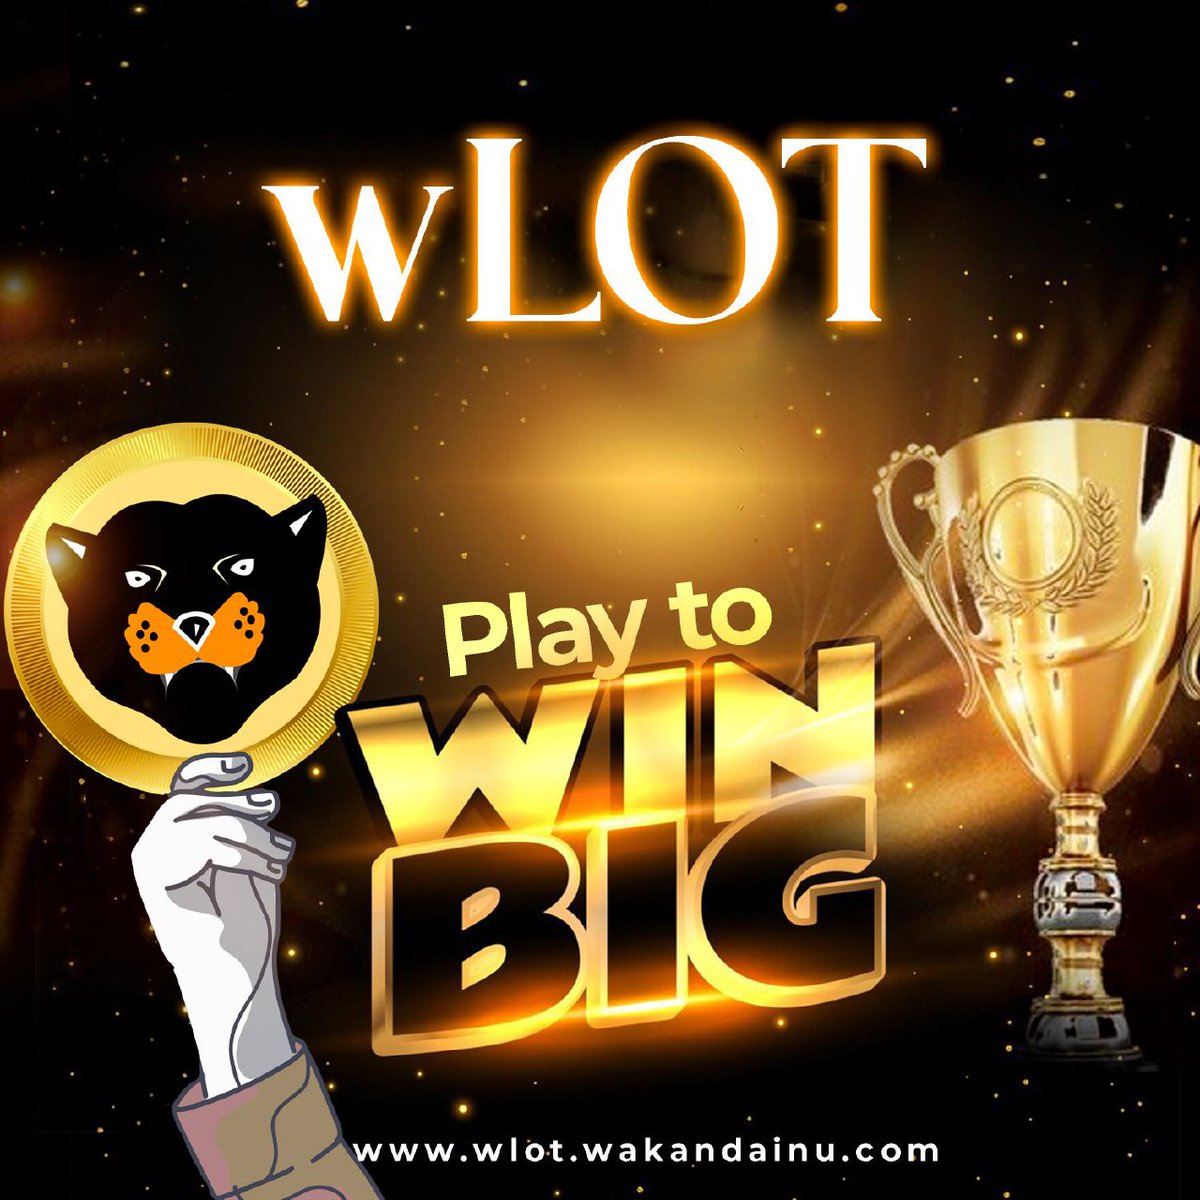 wLOT (#36) Currently OPEN Remaining Entries 5 to go !!! Join Now with 100 M WKD Link: wlot.wakandainu.com Prizes 1st - 280 M WKD 2nd - 175 M WKD 3rd - 105 M WKD #wLOT